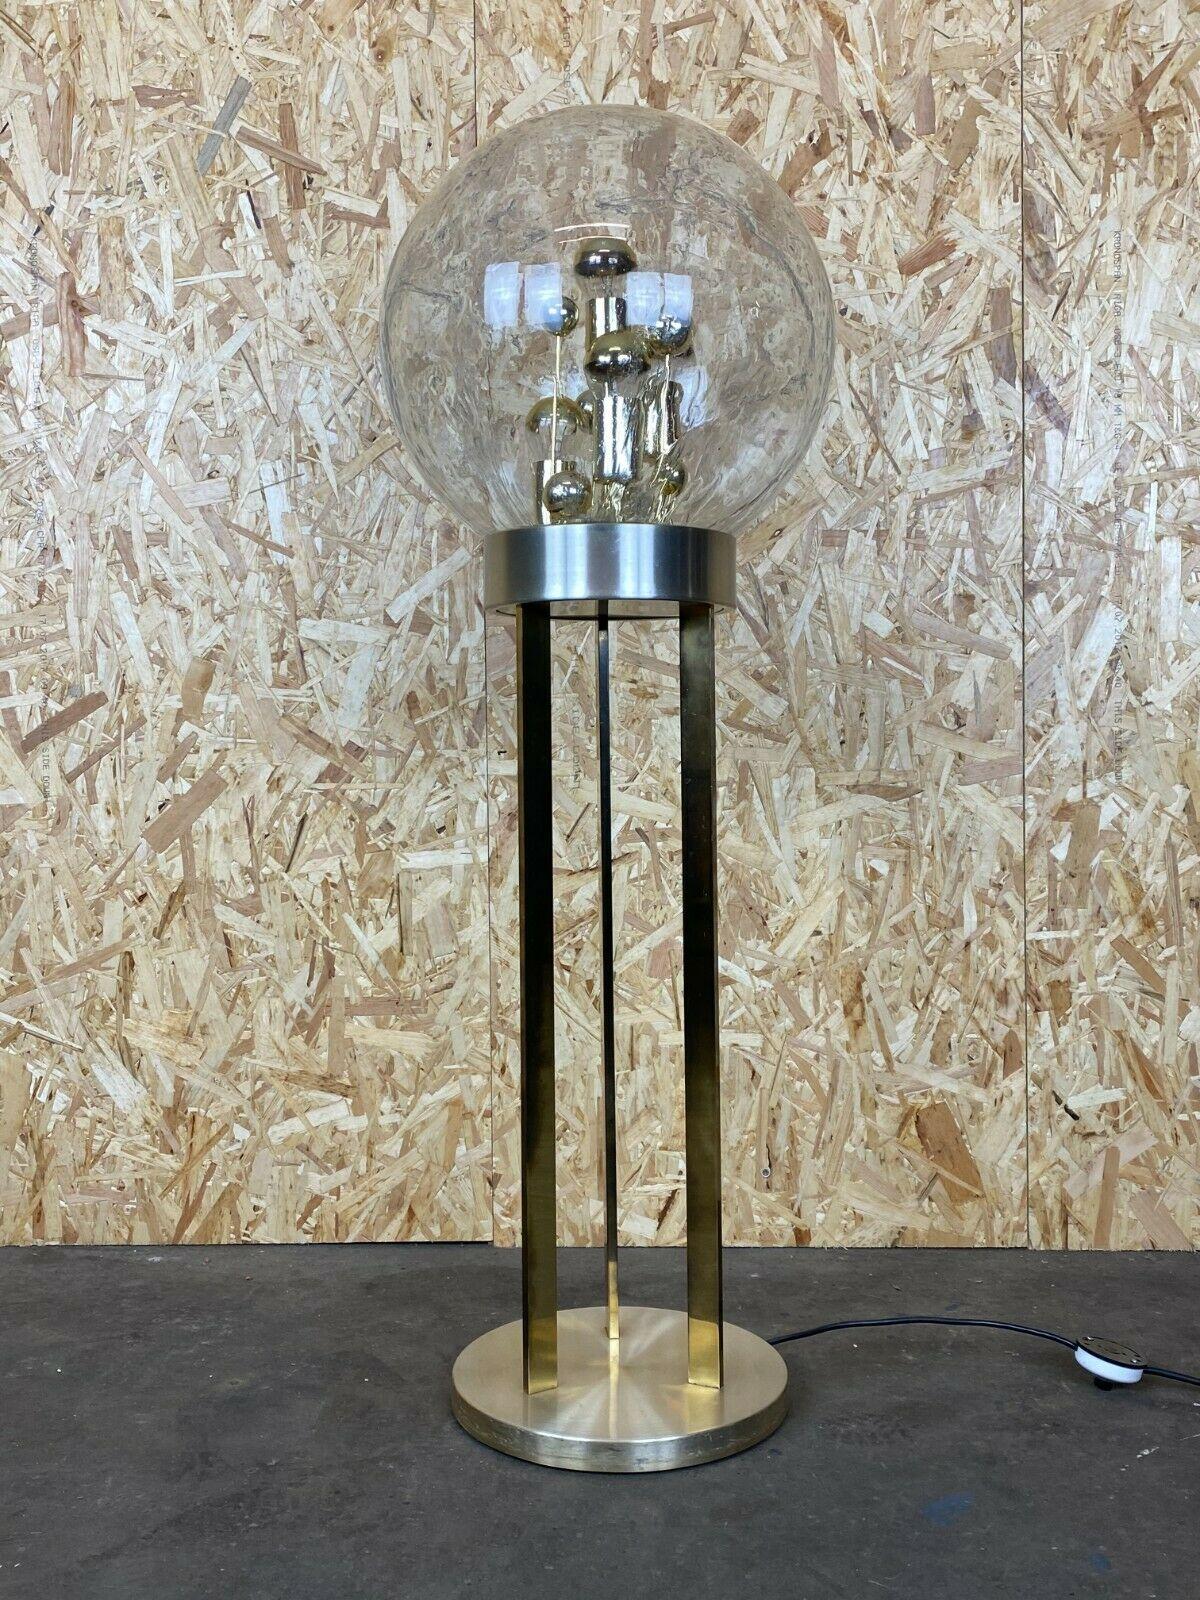 60s 70s lamp light table lamp ball lamp Doria glass space age design

Object: floor lamp

Manufacturer: Doria

Condition: good

Age: around 1960-1970

Dimensions:

Diameter = 40cm
Height = 117cm

Other notes:

The pictures serve as